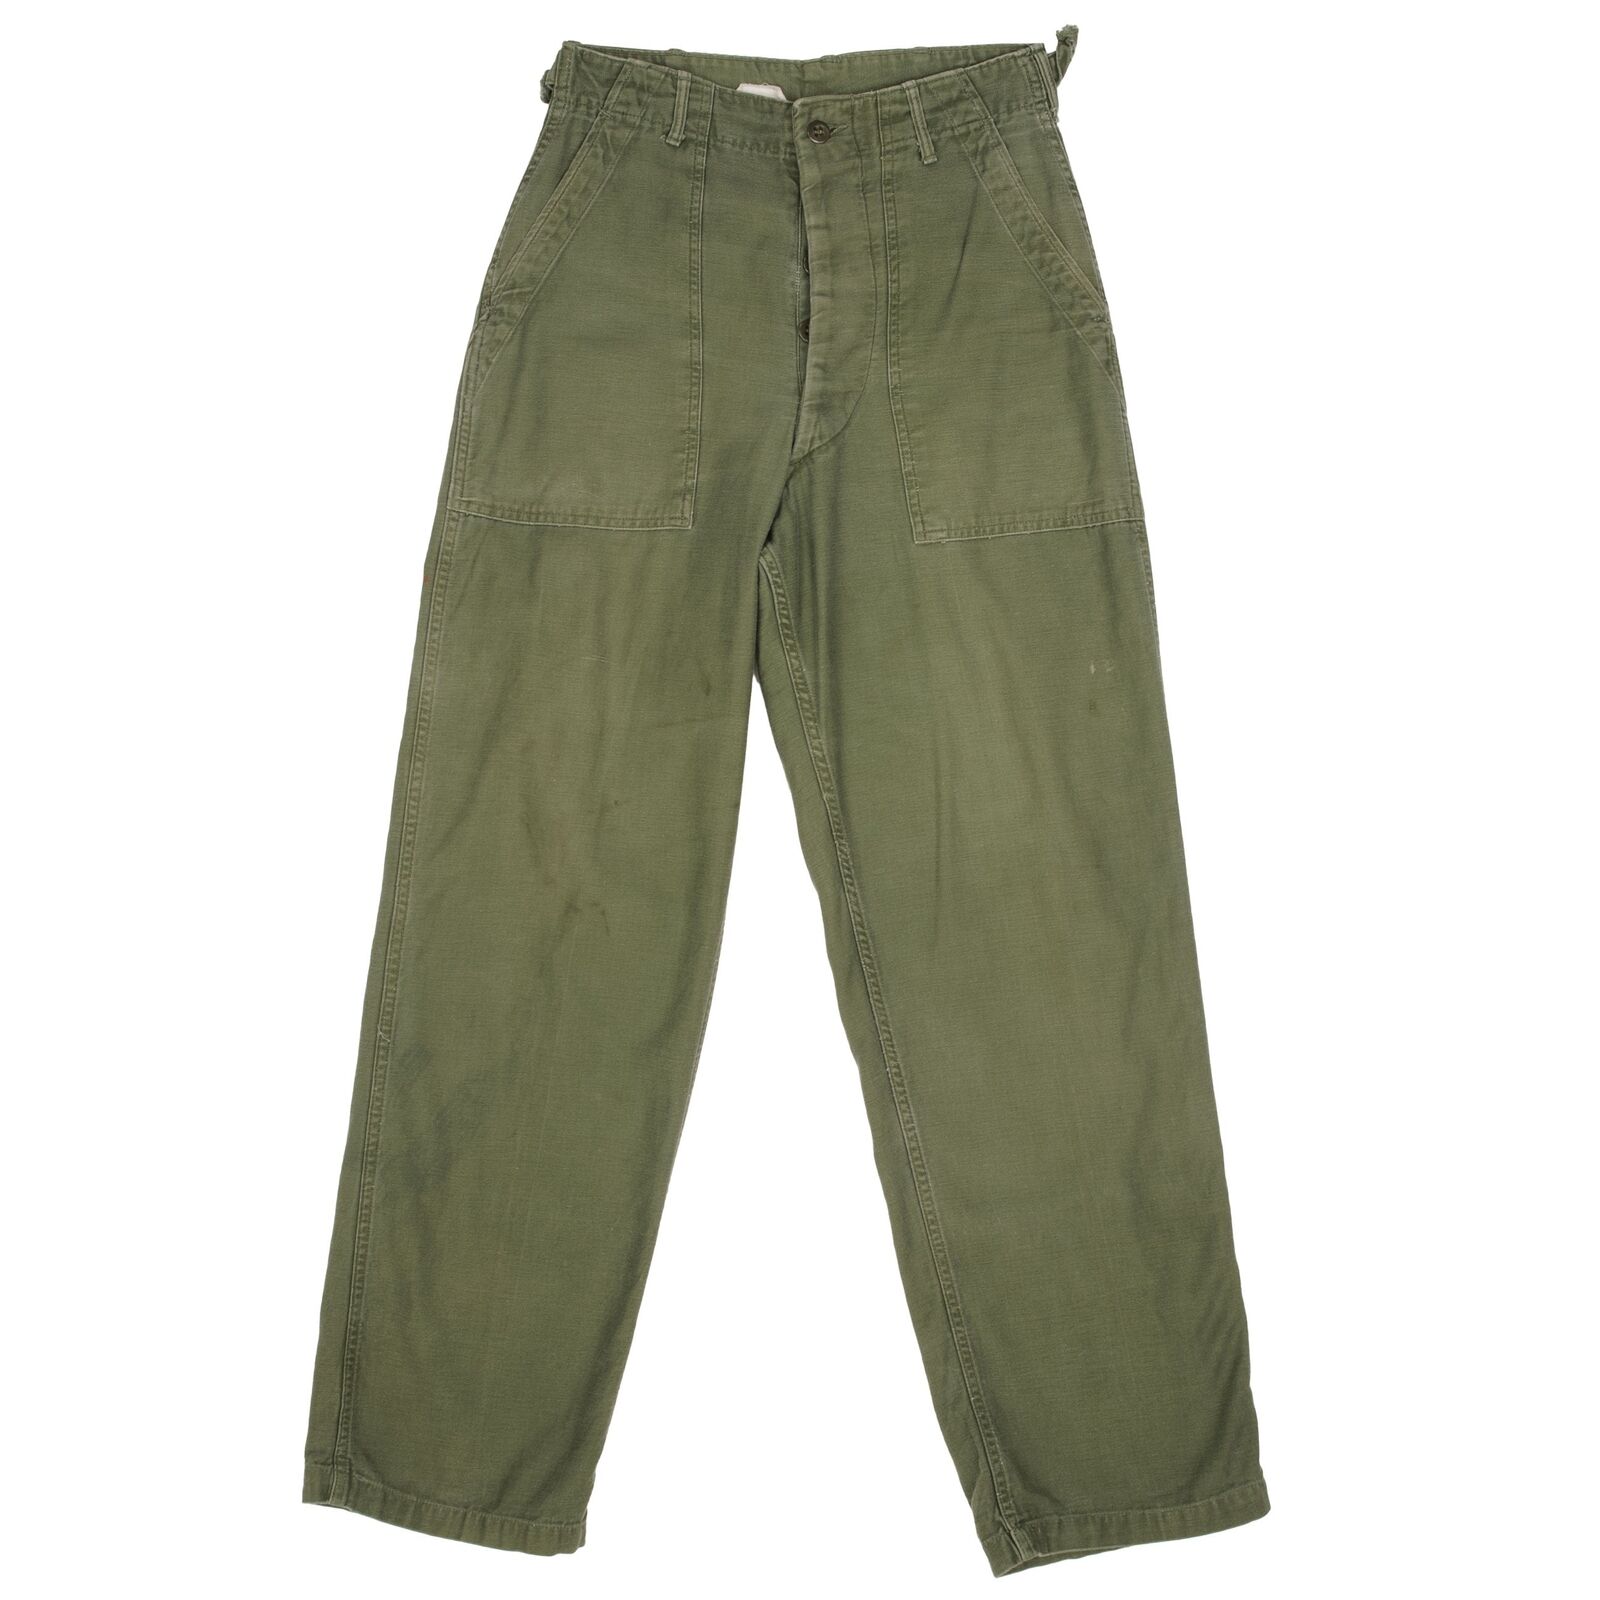 VINTAGE US ARMY UTILITY TROUSERS PANTS OG-107 SATEEN 1960S VIETNAM WAR SMALL